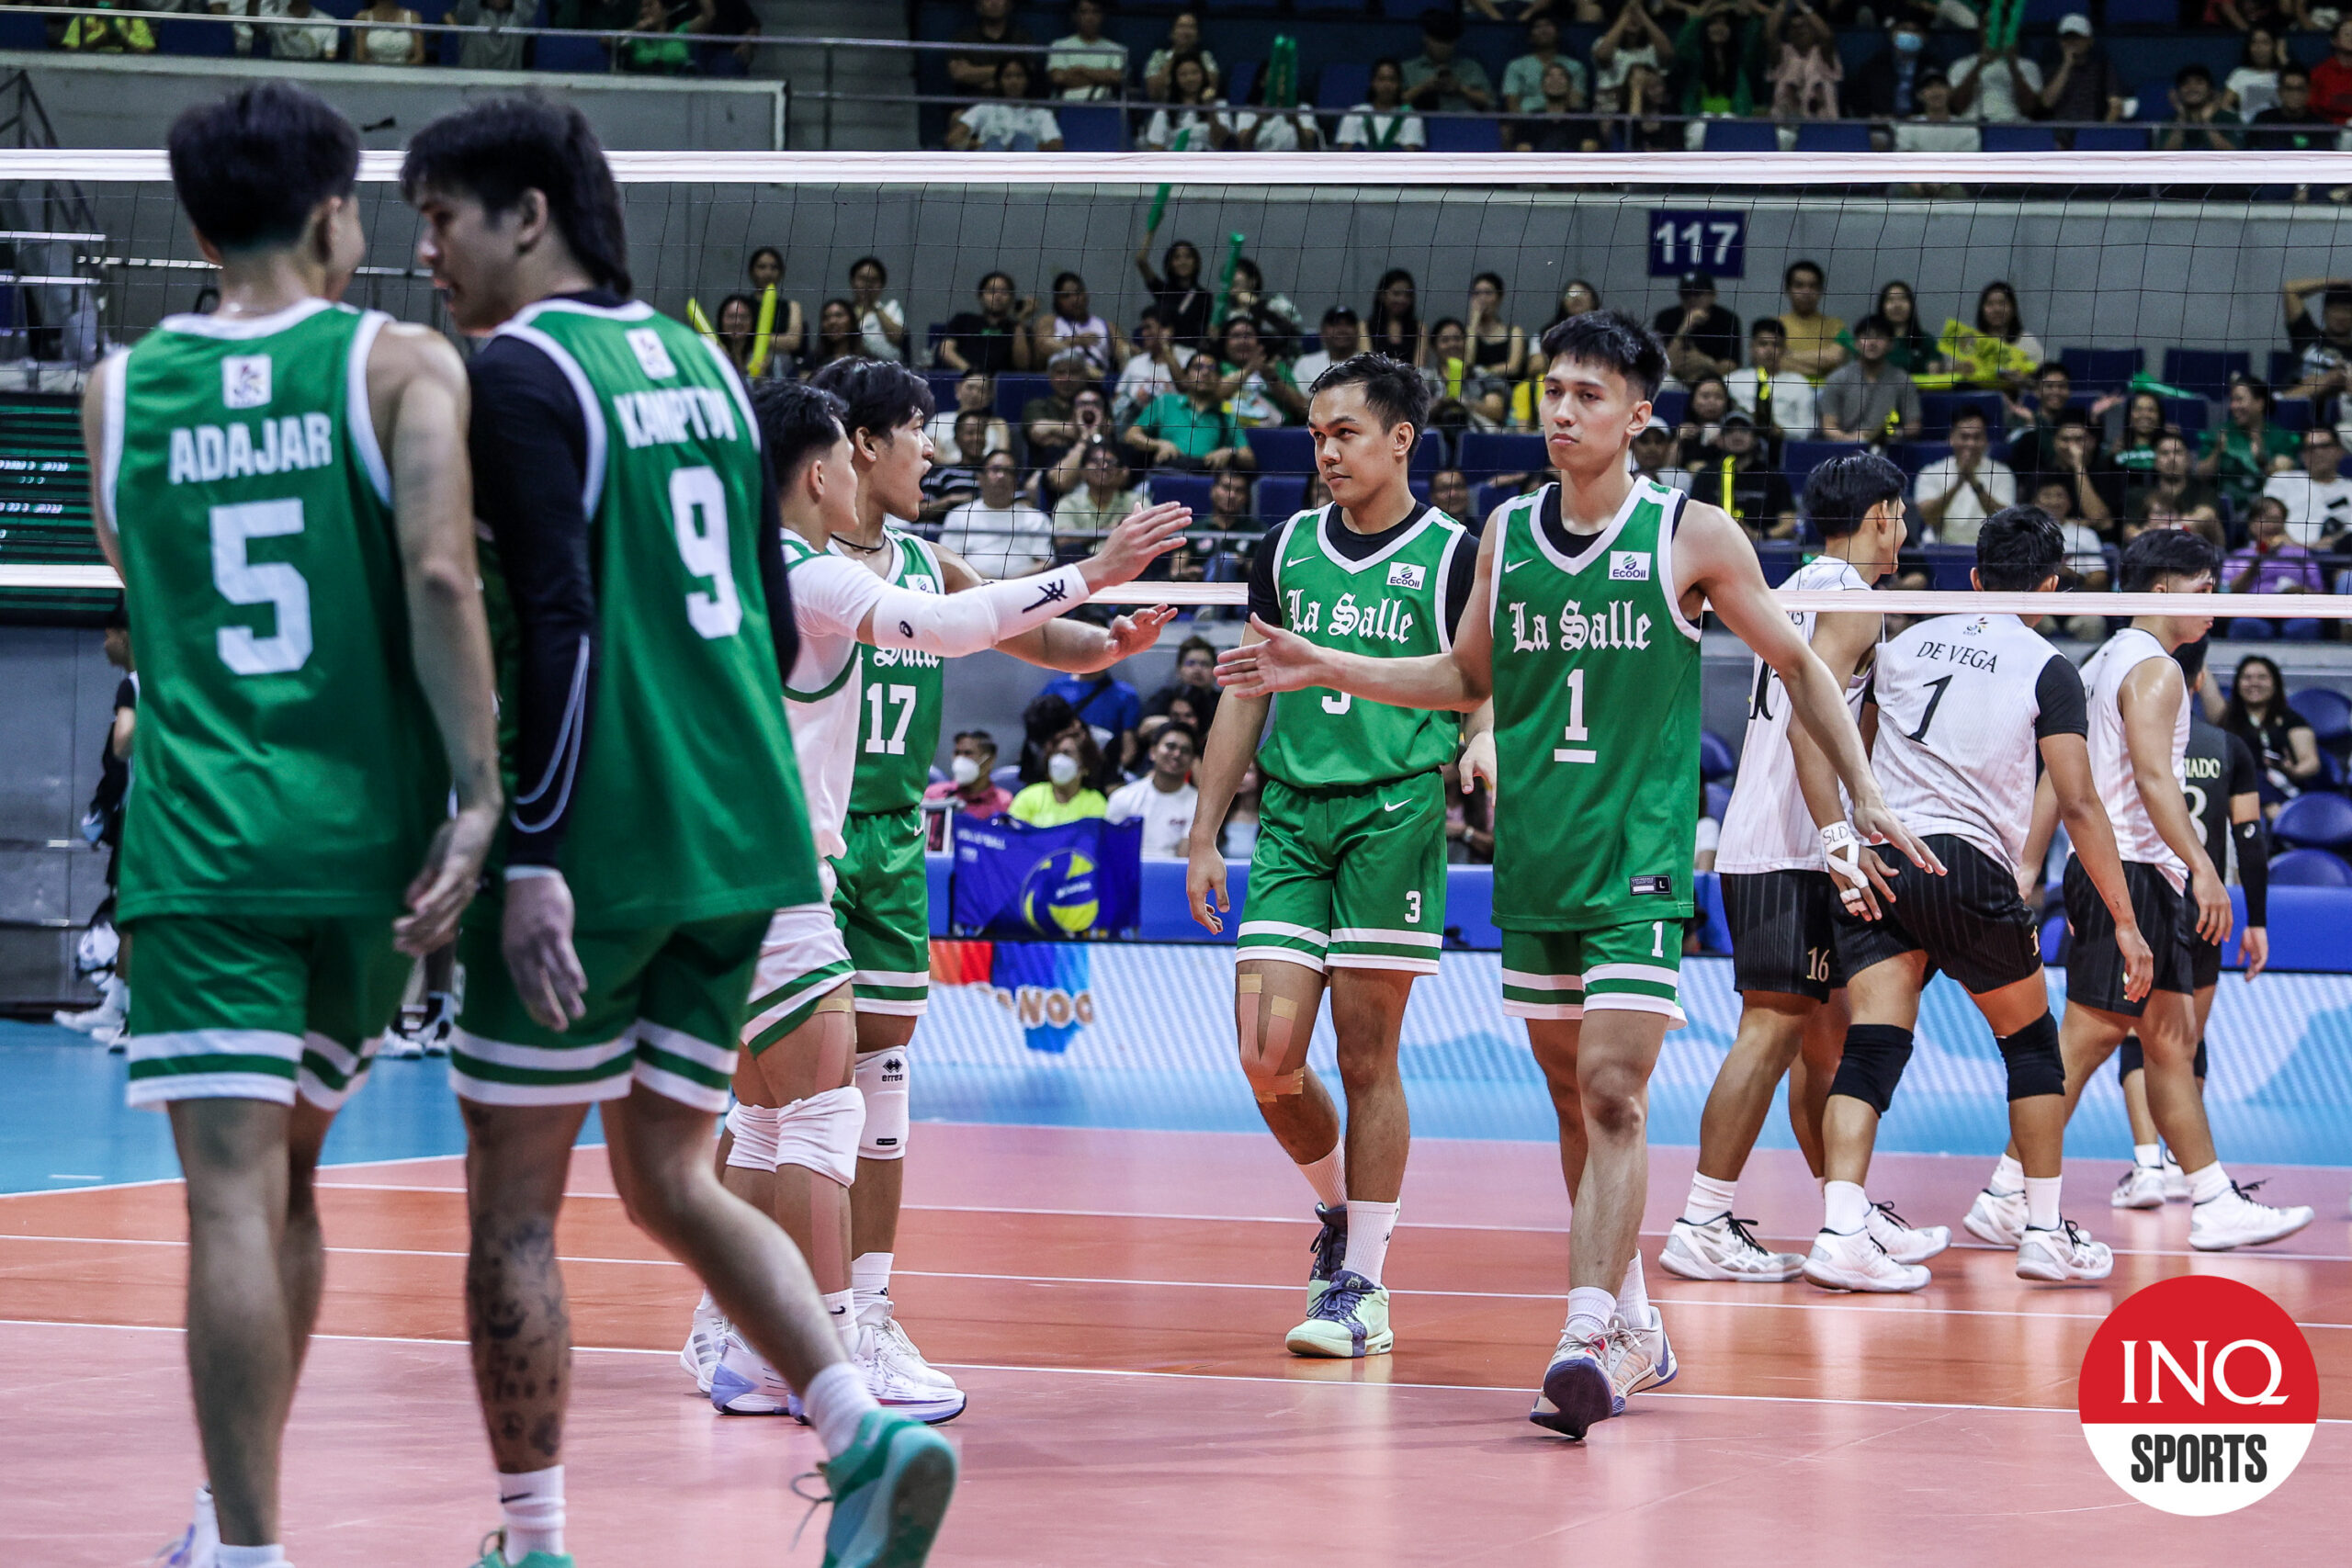 La Salle Green Spikers' JM Ronquillo in a UAAP Season 86 men's volleyball tournament.